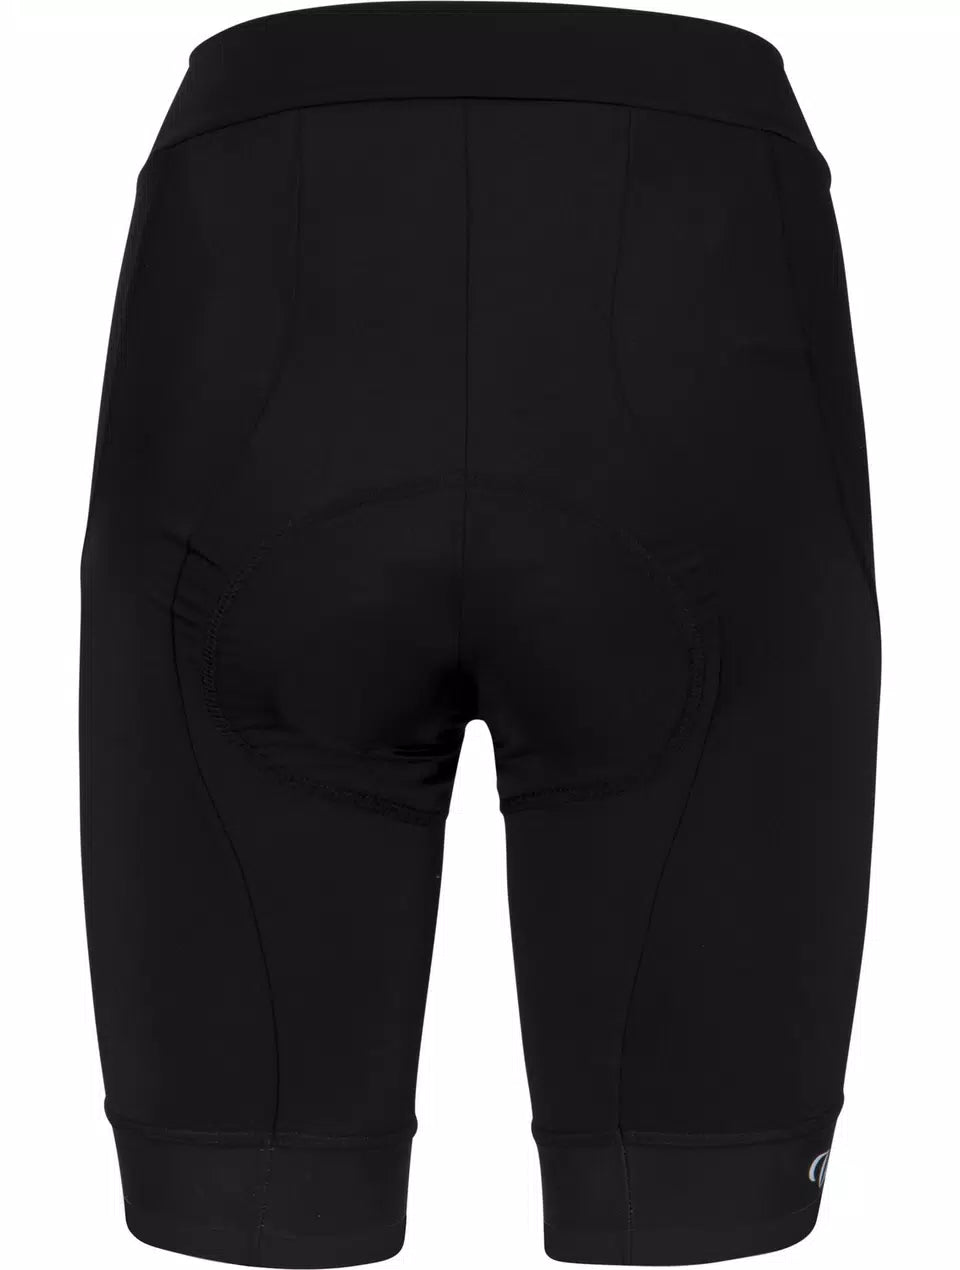 Wilier Clothing Shorts Cycling Club Donna - Black